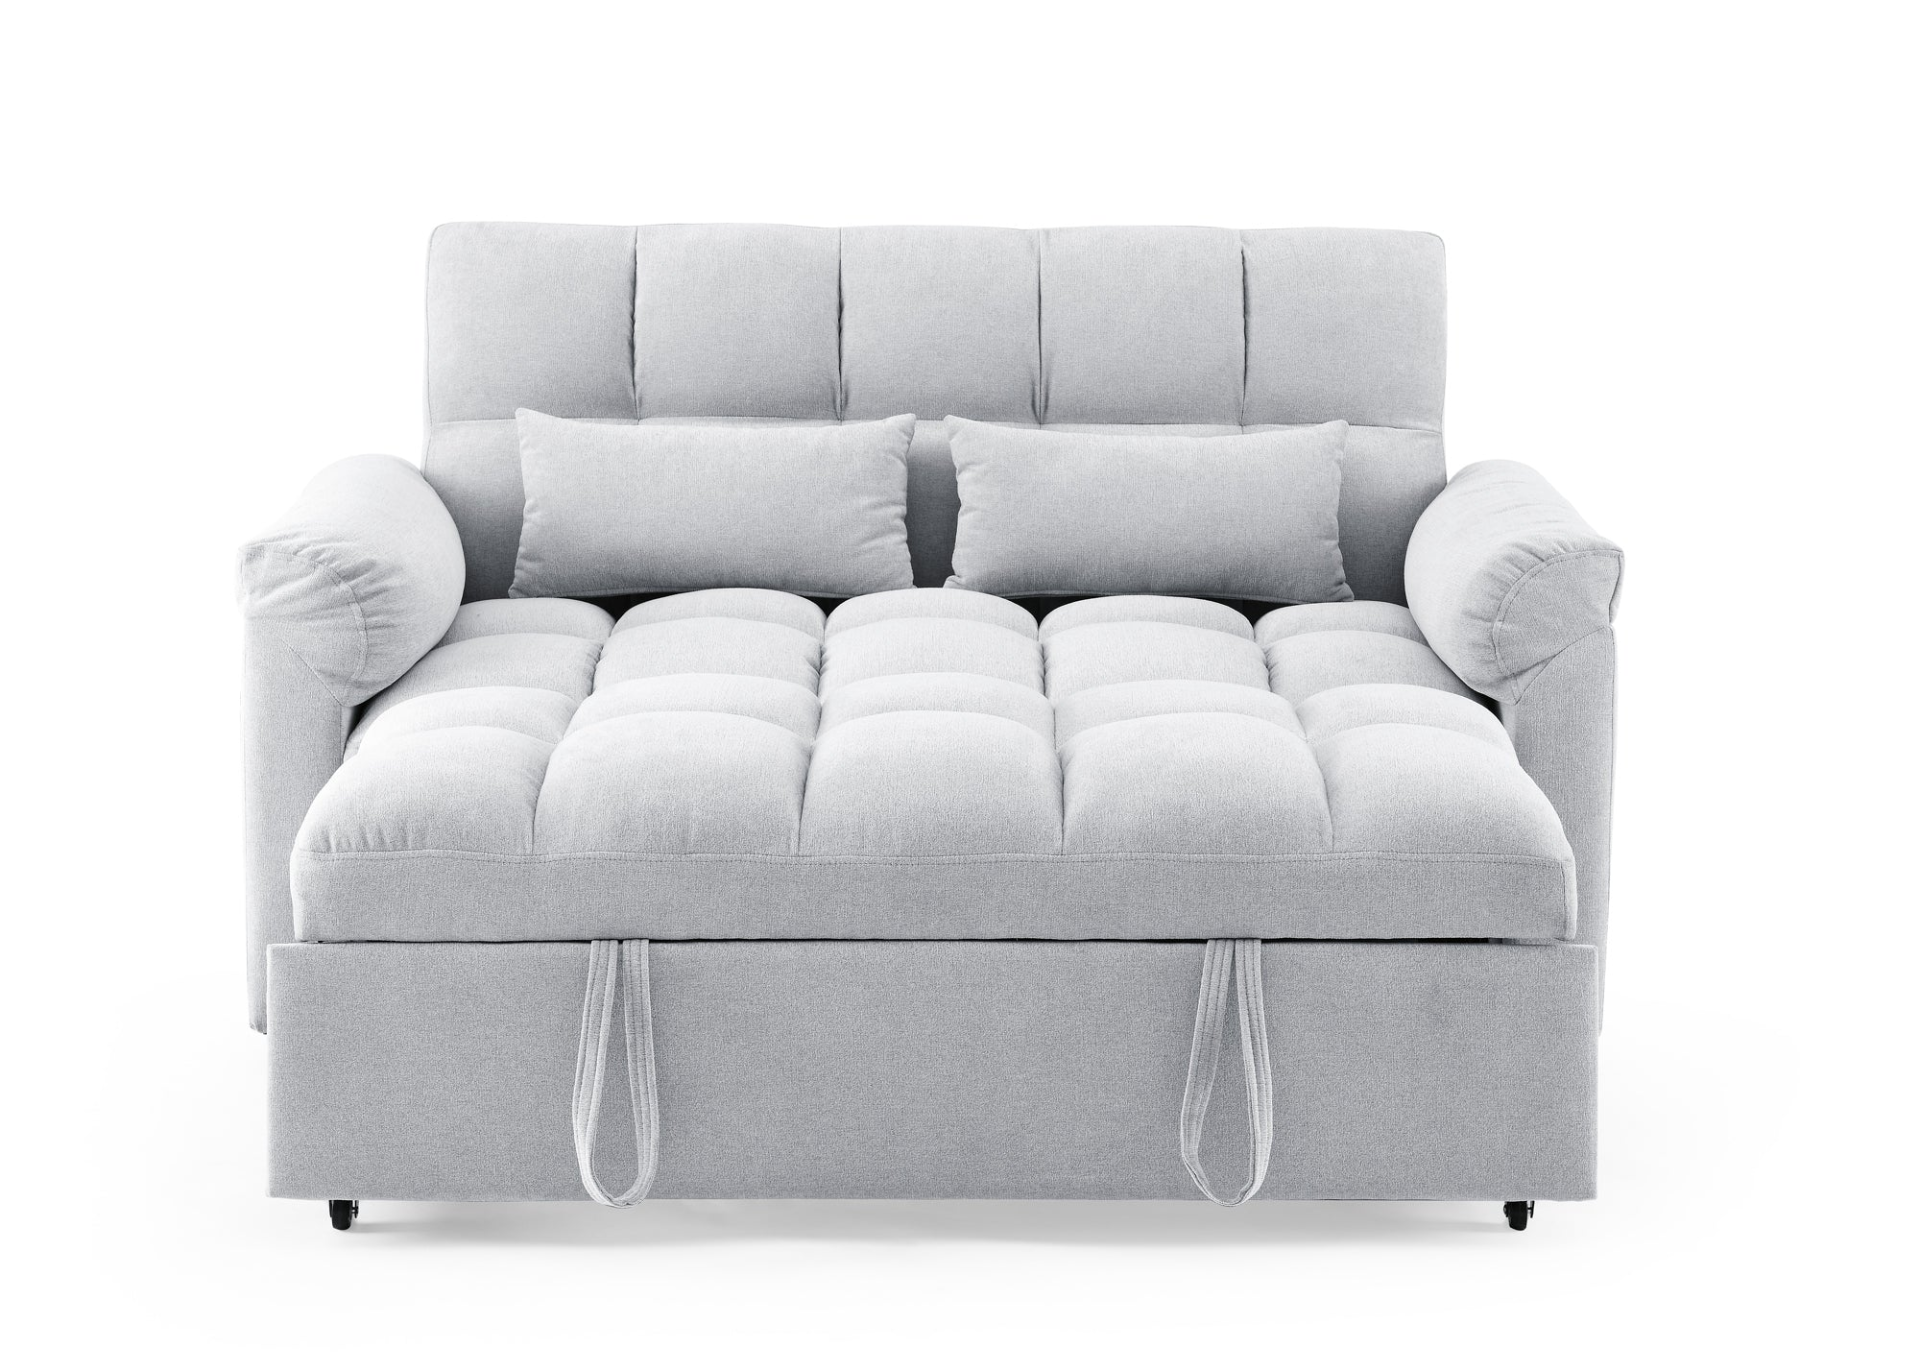 Light Grey Modern Luxury Loveseats Sofa Bed with Pull-out Bed